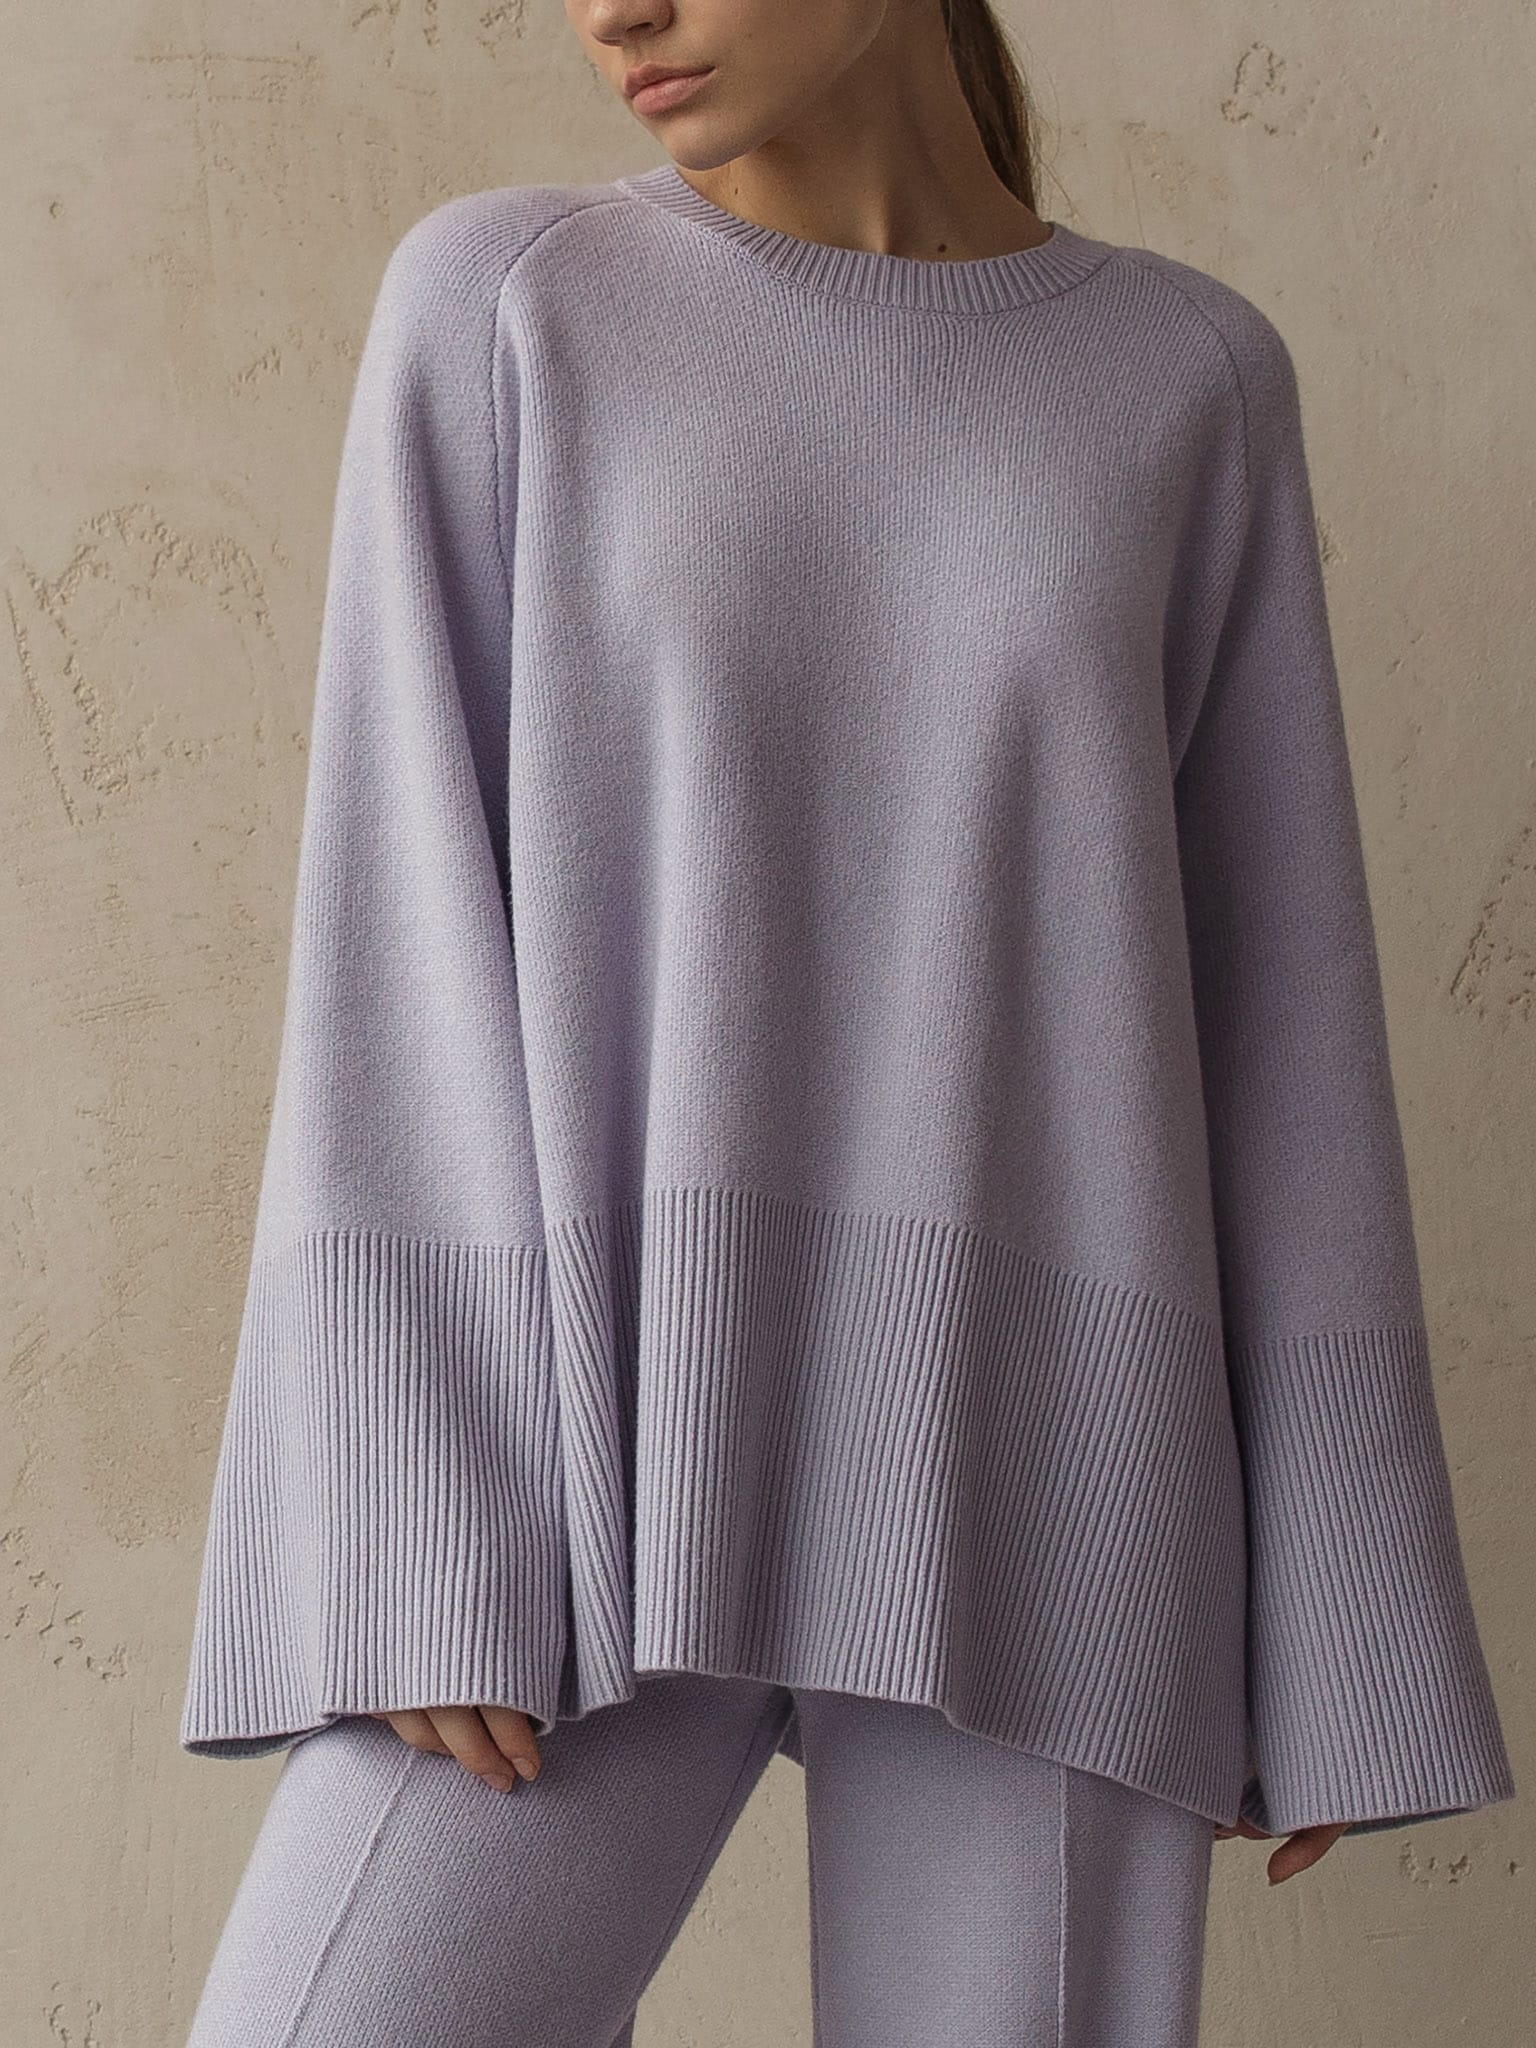 Oversized knitted sweater